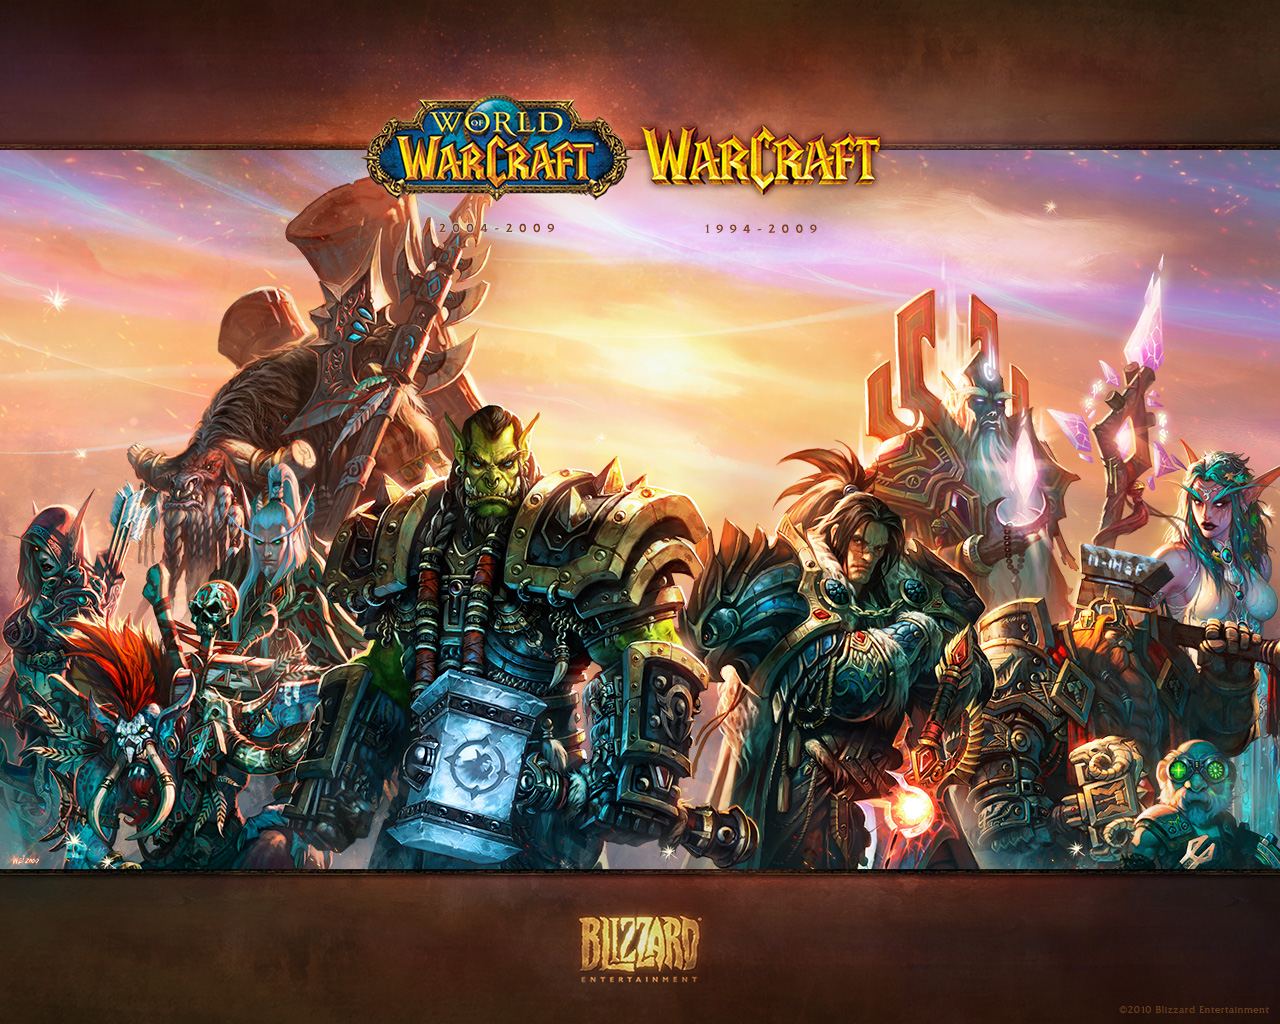 Wallpaper WoW World of Warcraft vdeo game